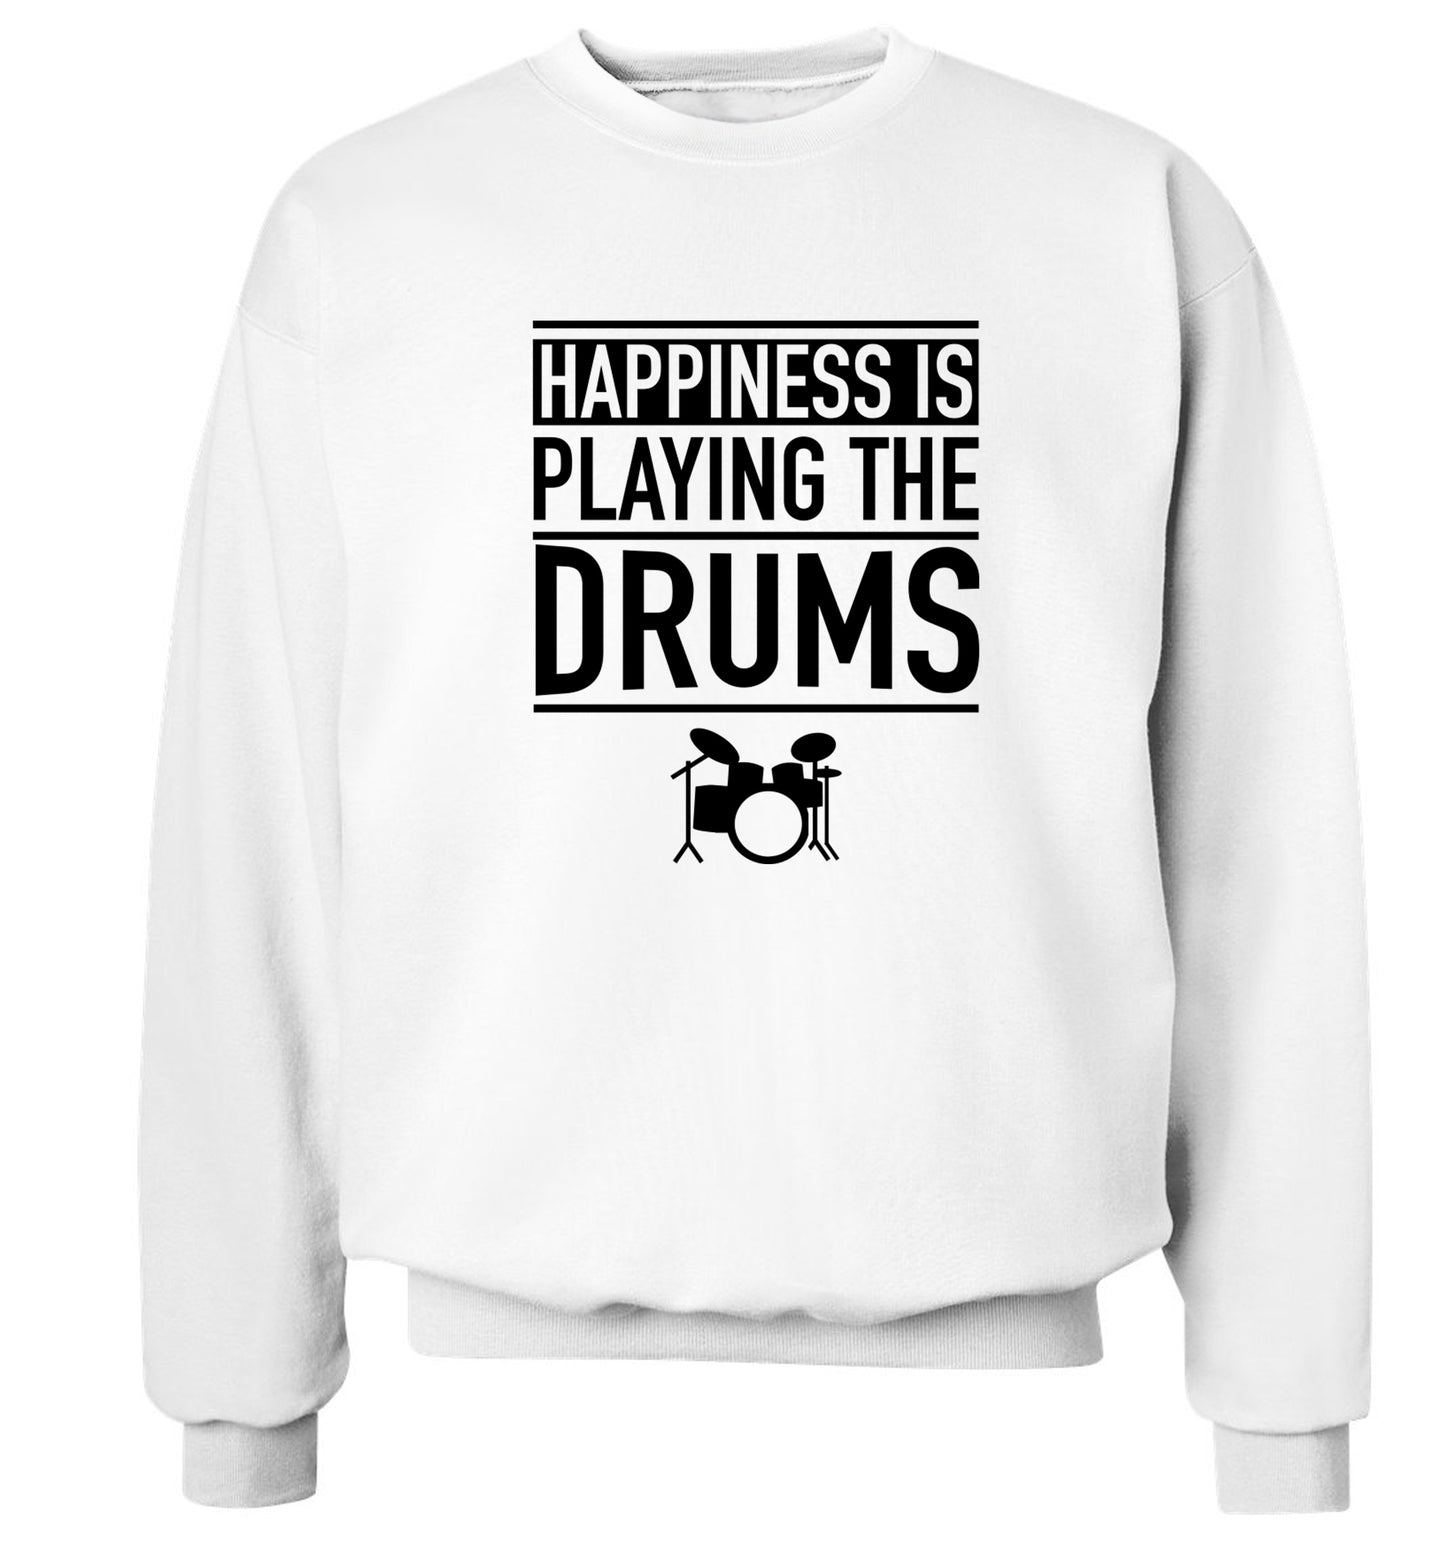 Happiness is playing the drums Adult's unisex white Sweater 2XL